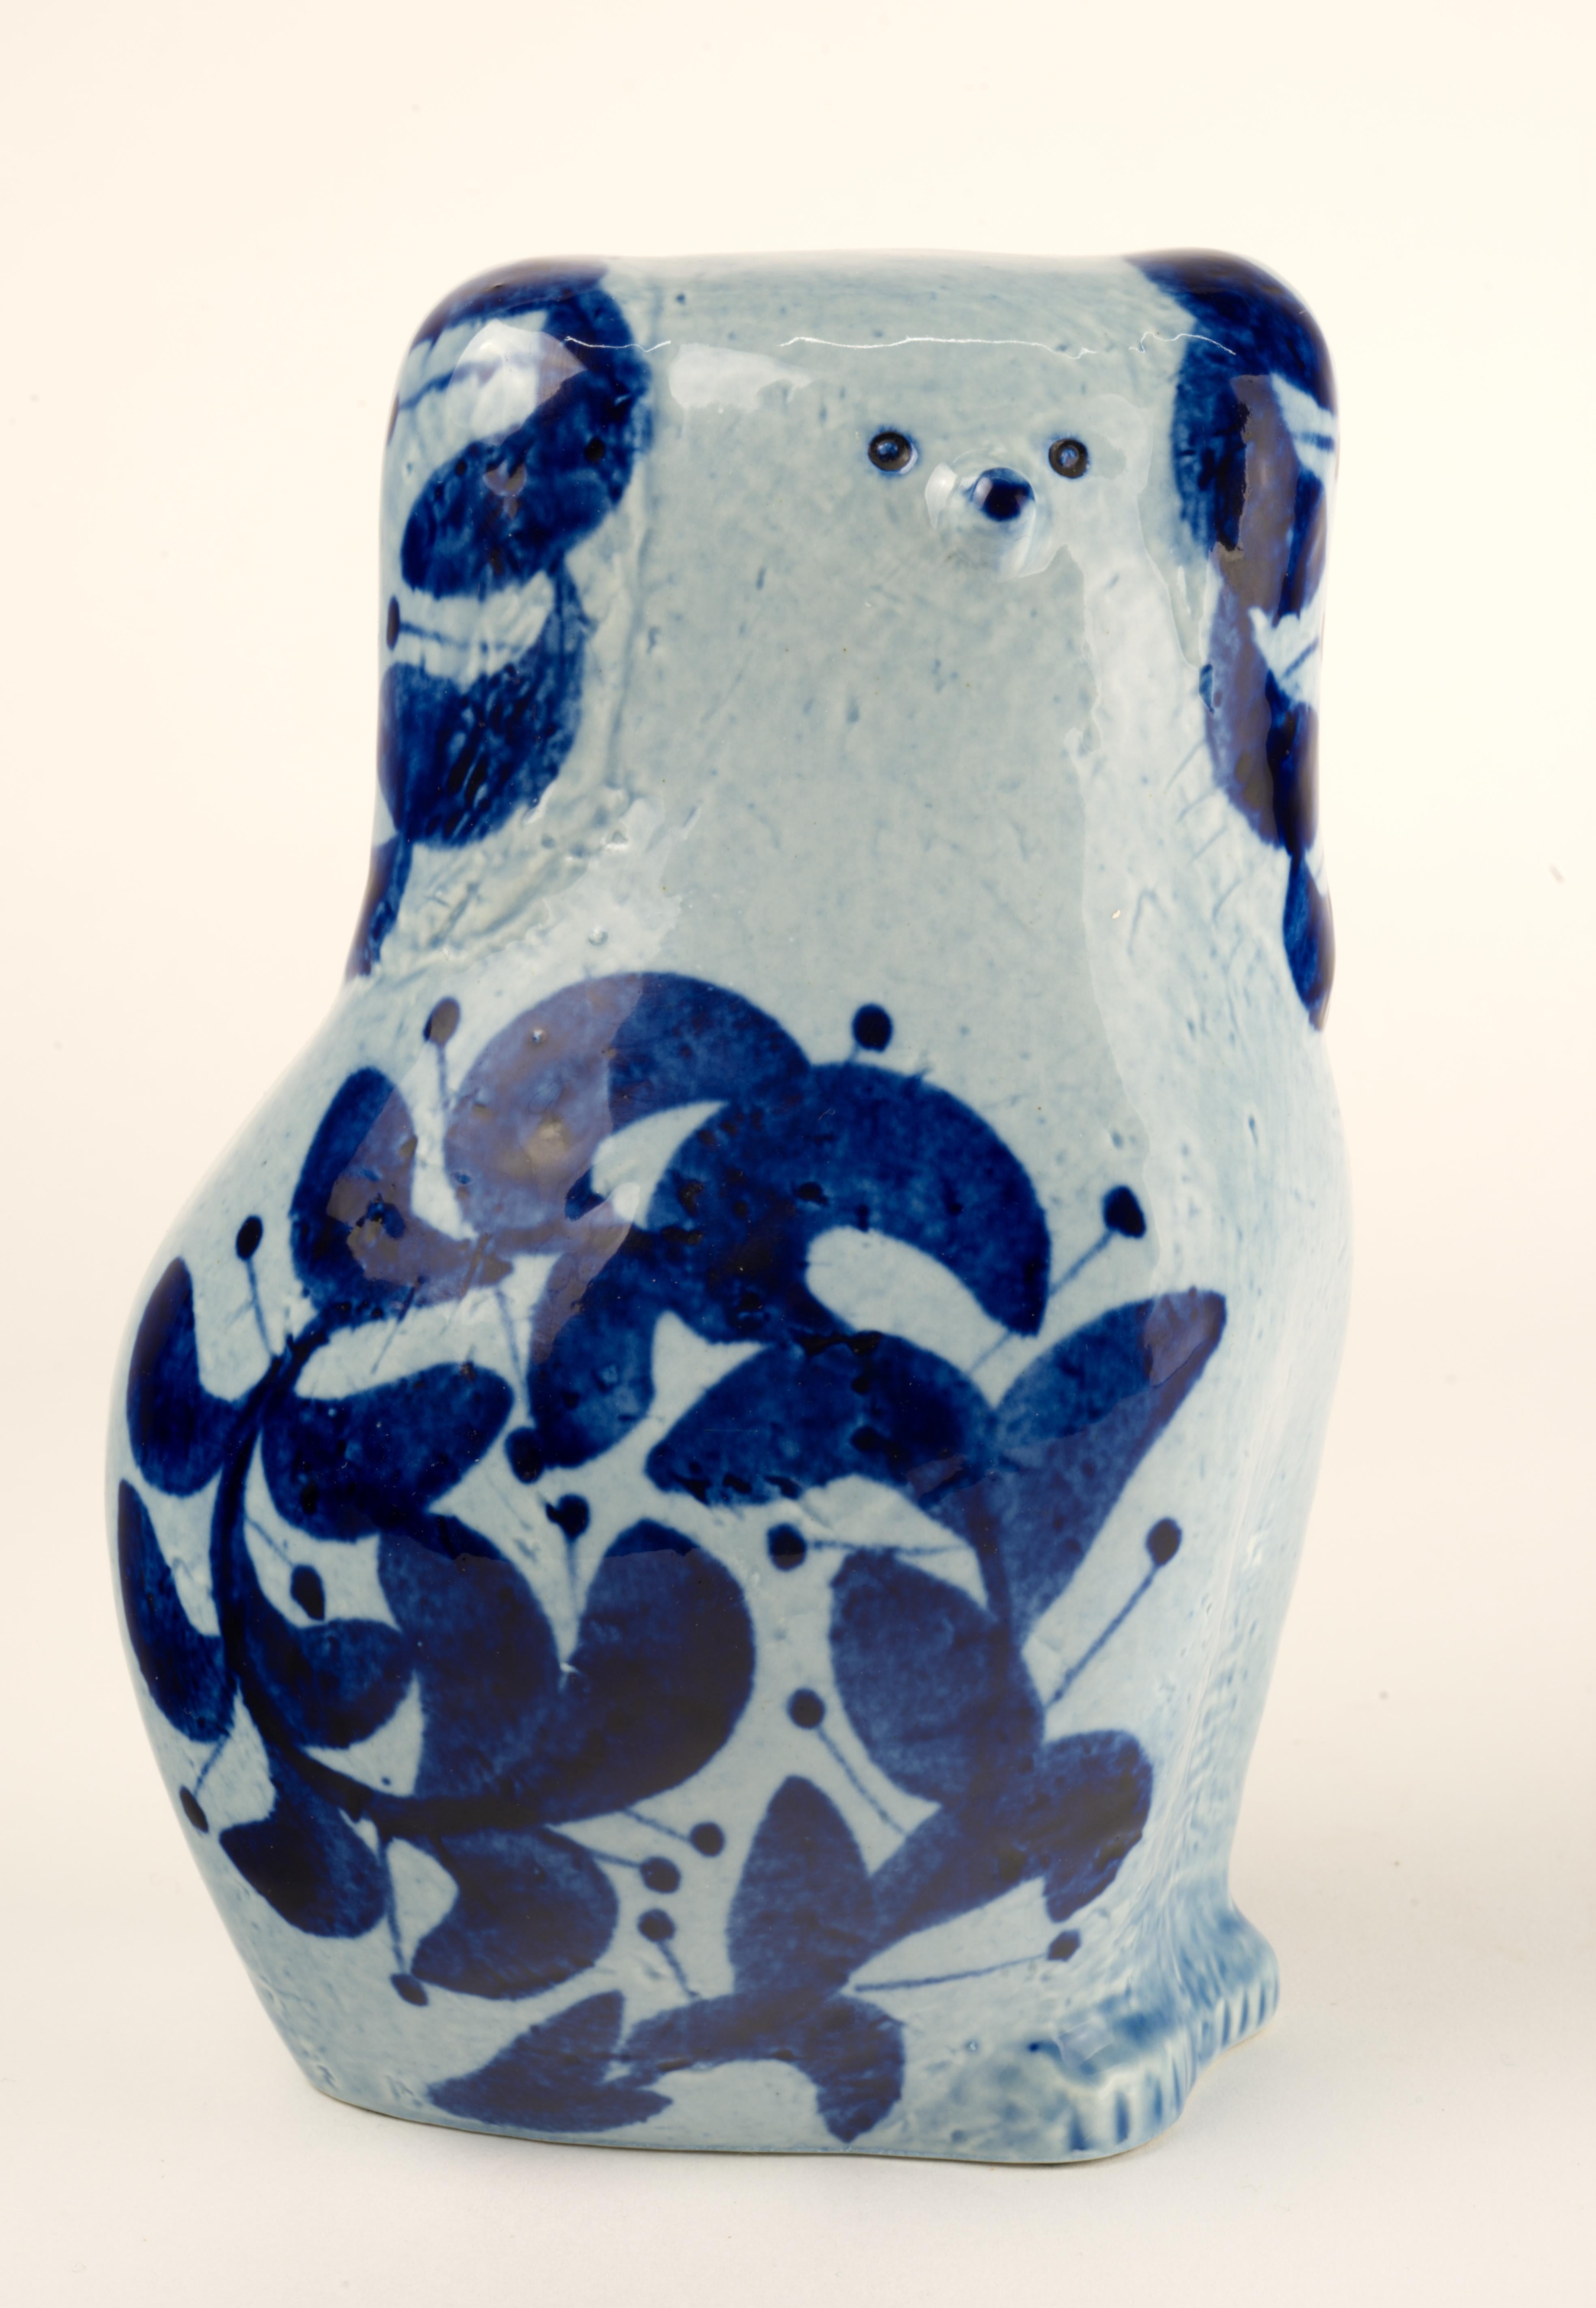  Poodle is made of white stoneware with shiny light blue glaze and dark blue hand painted decoration. It was designed by Lisa Larson (1931-2024) as part of the 